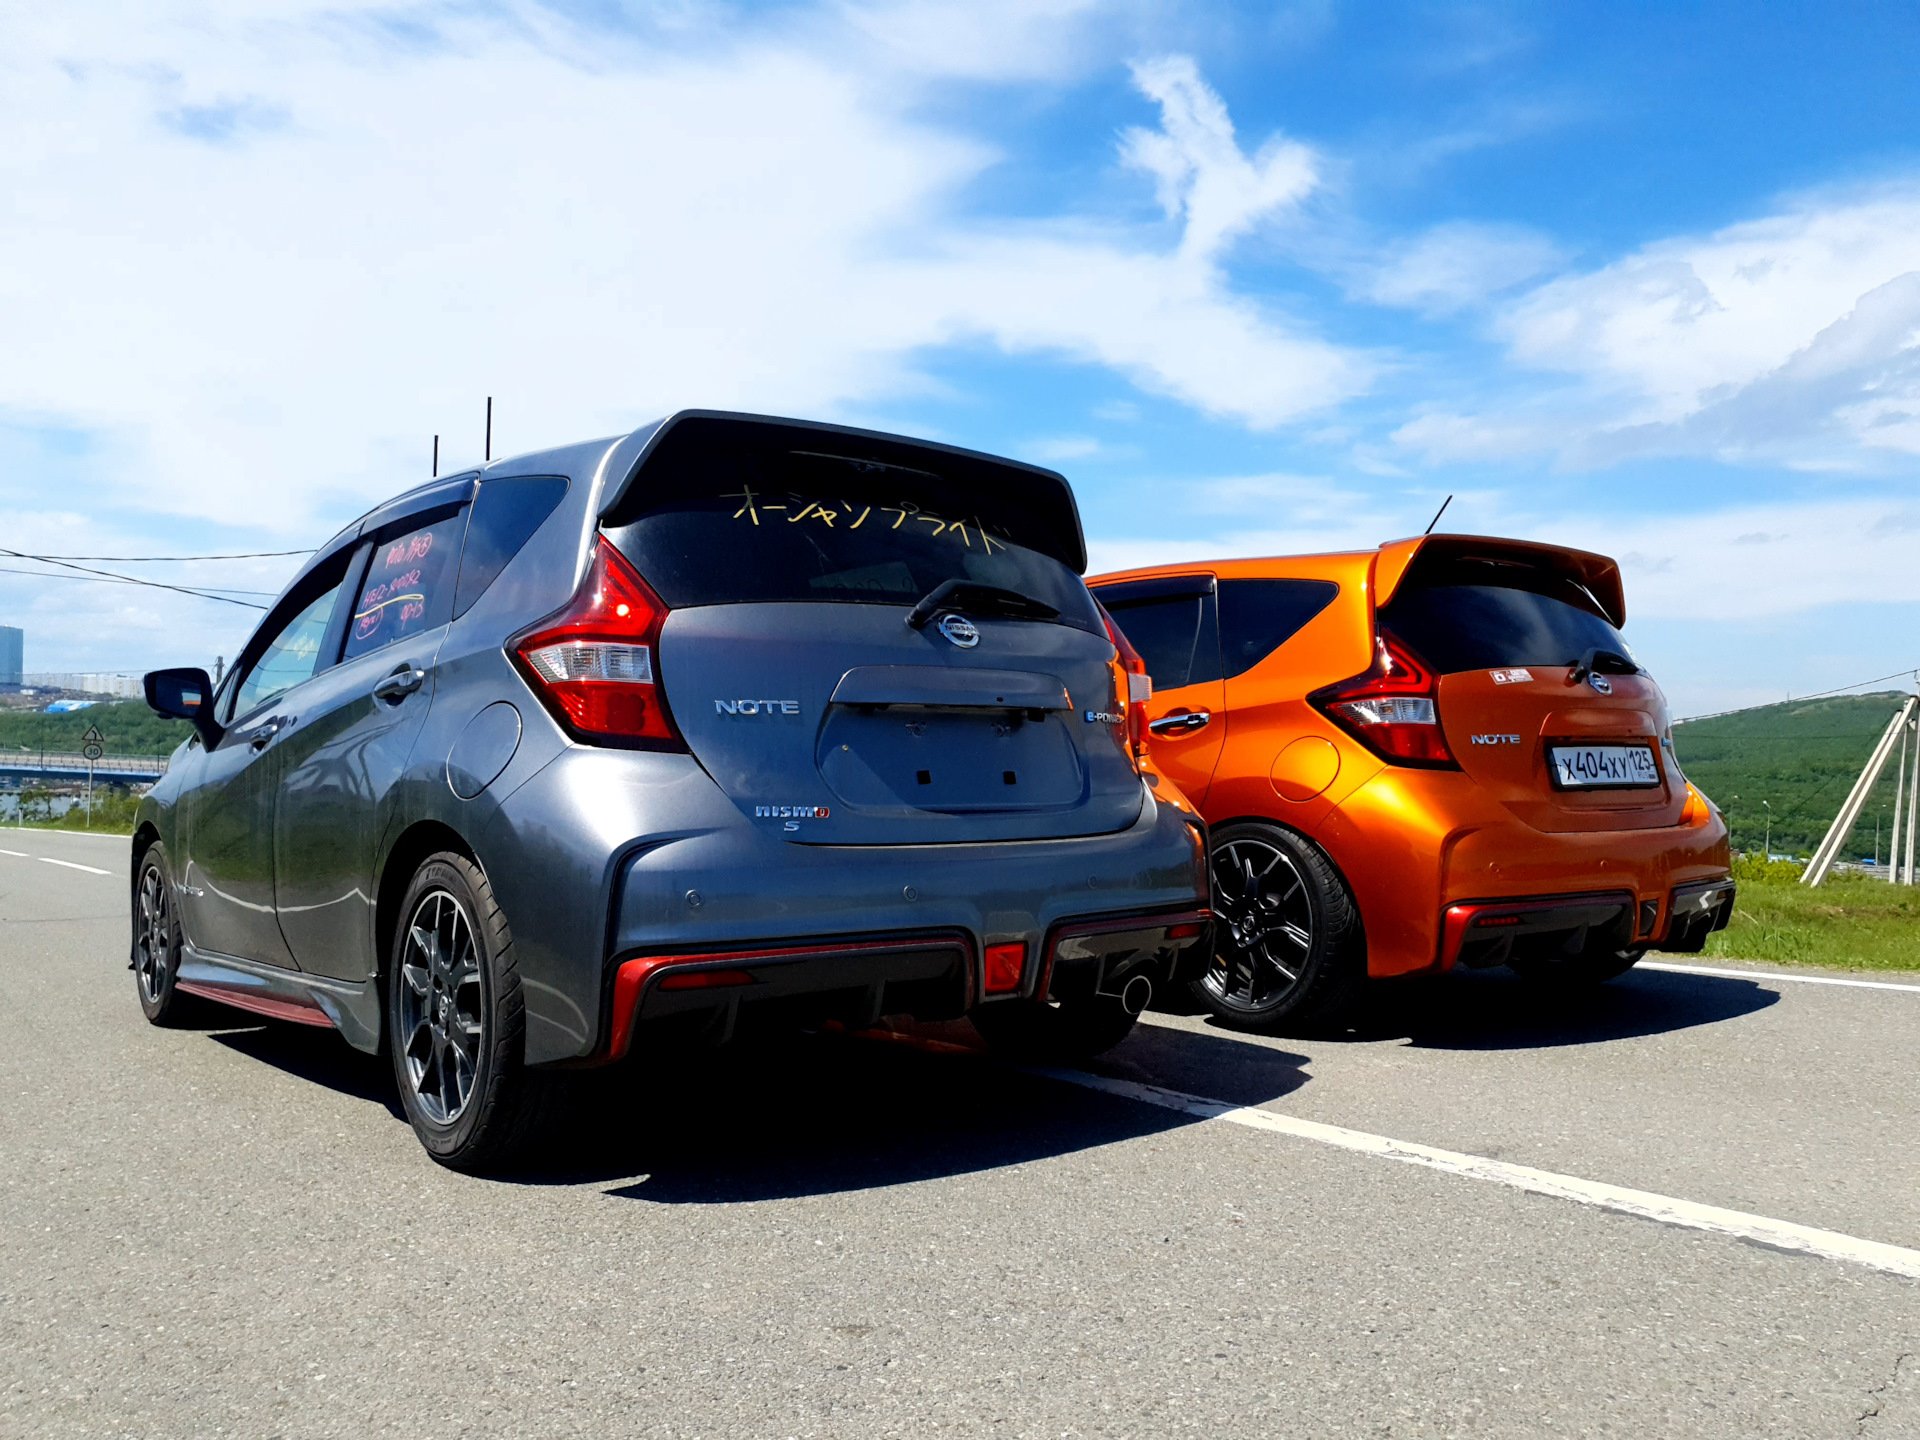 Nissan note 2018. Nissan Note 2017 гибрид. Nissan Note e-Power Nismo. Nissan Note 2018 гибрид. Nissan Note e-Power 2017.